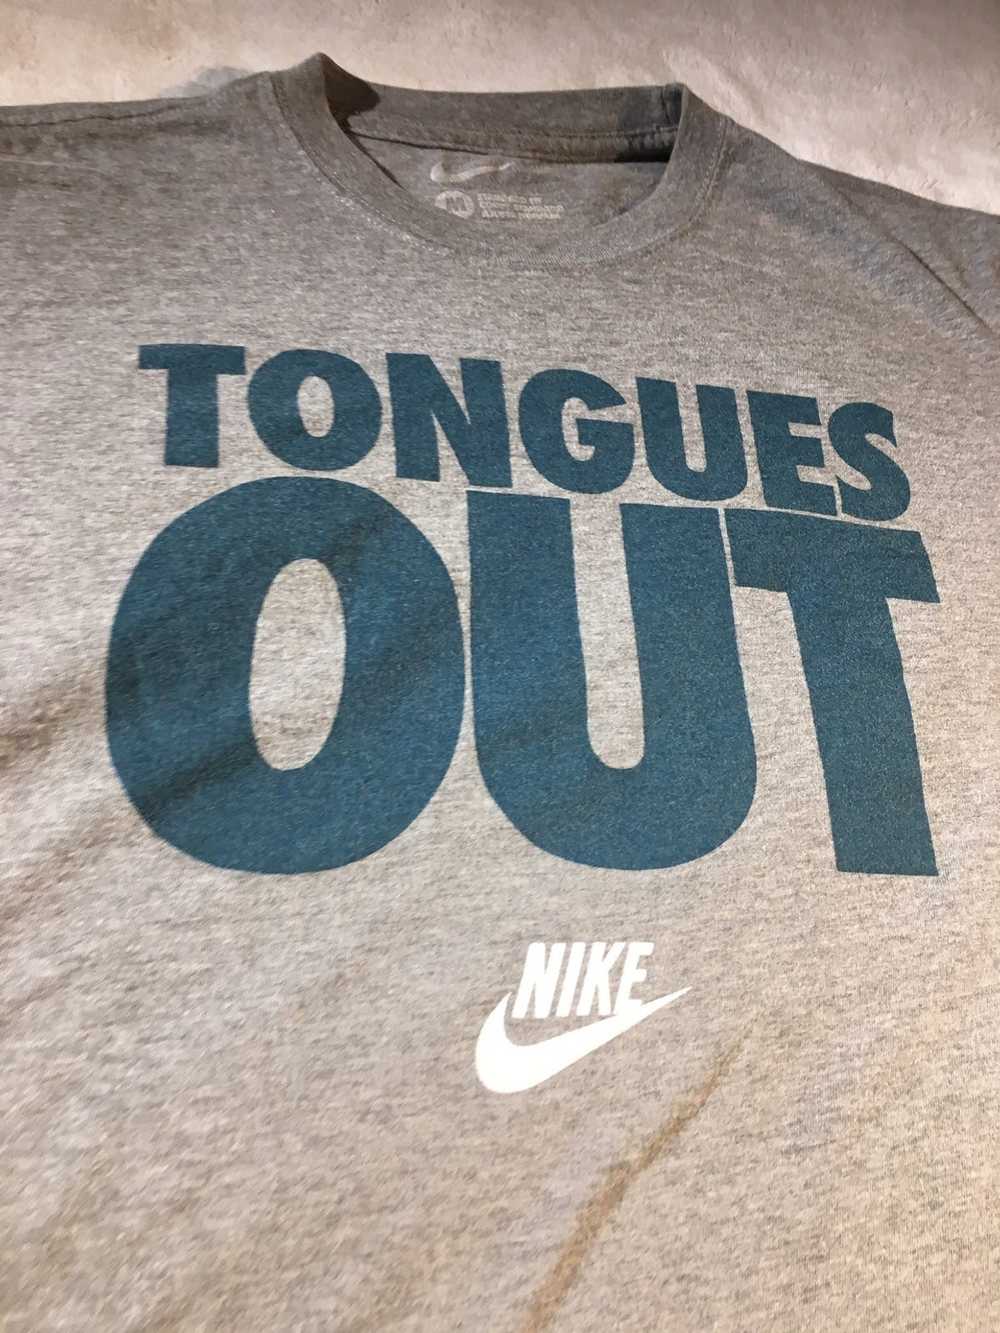 Nike Nike x Tongues Out Graphic Tee - image 2